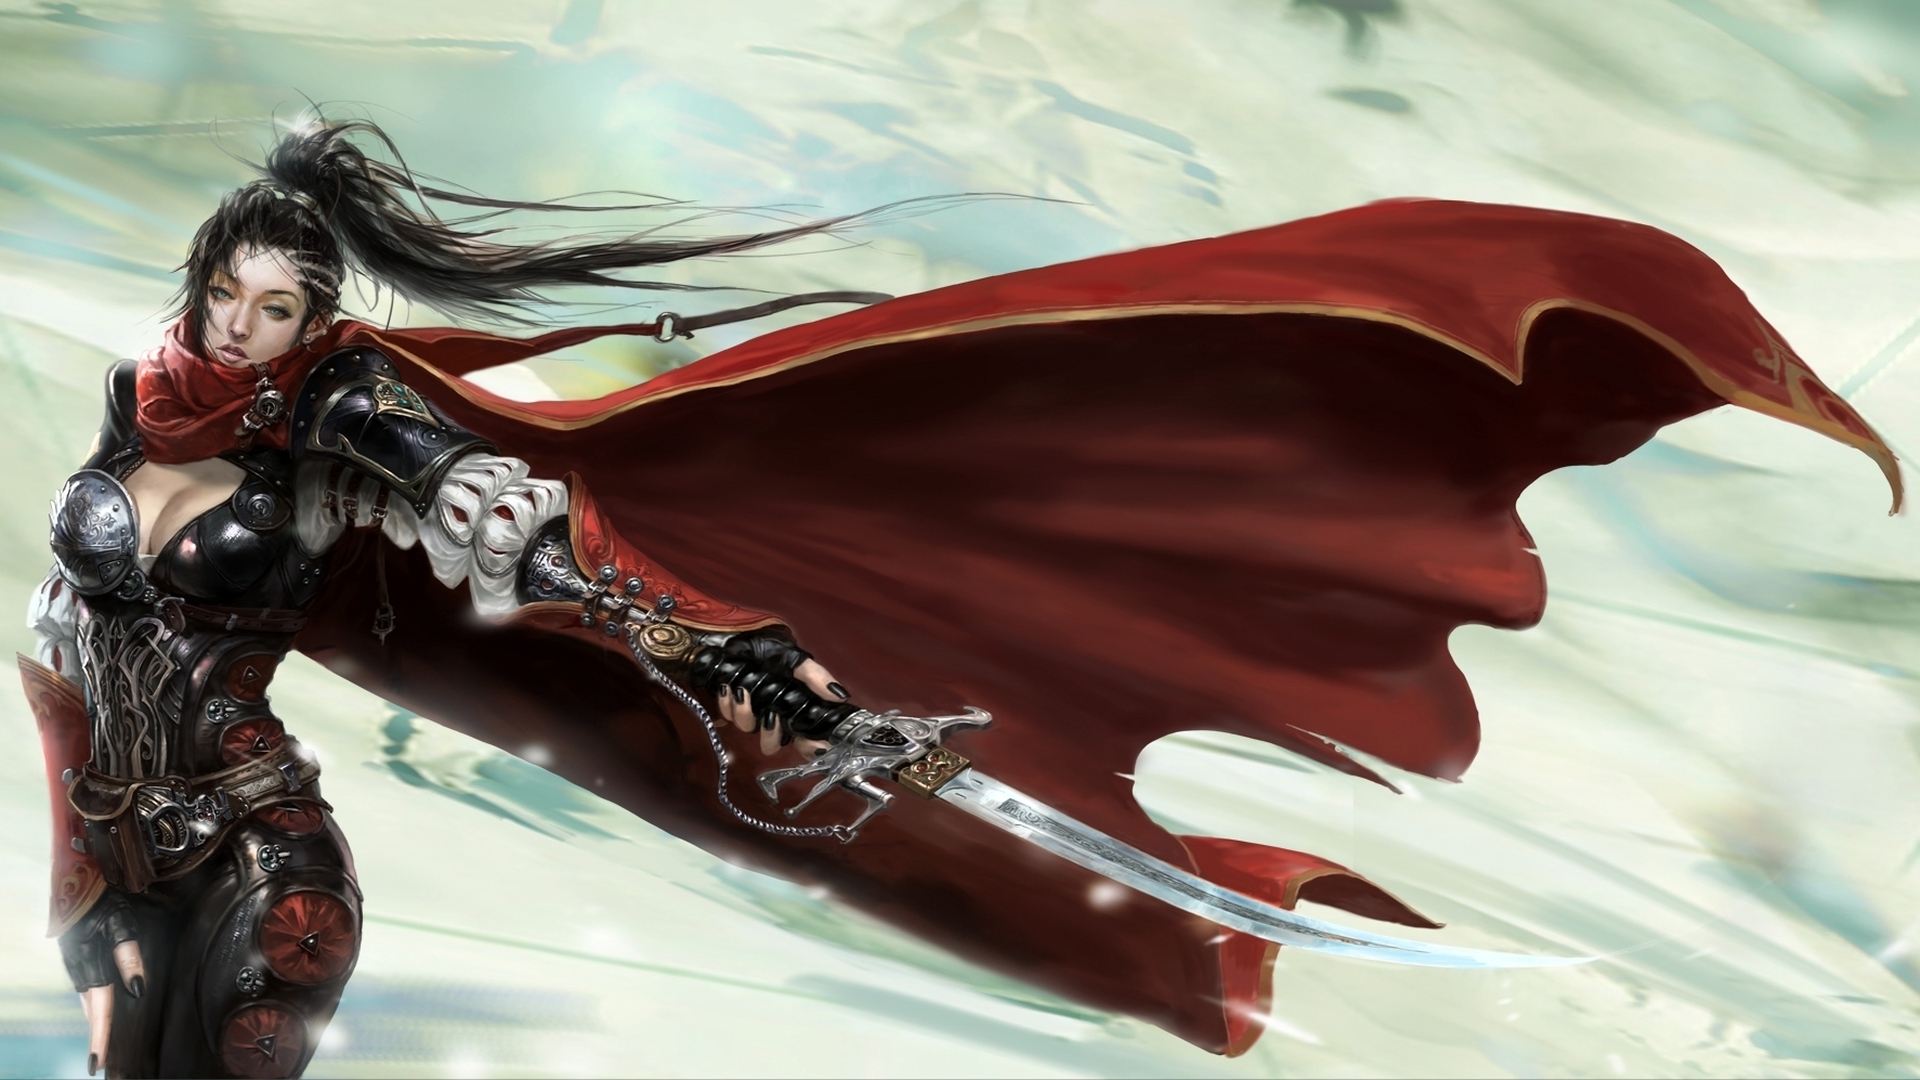 Cloaked woman warrior Wallpaper